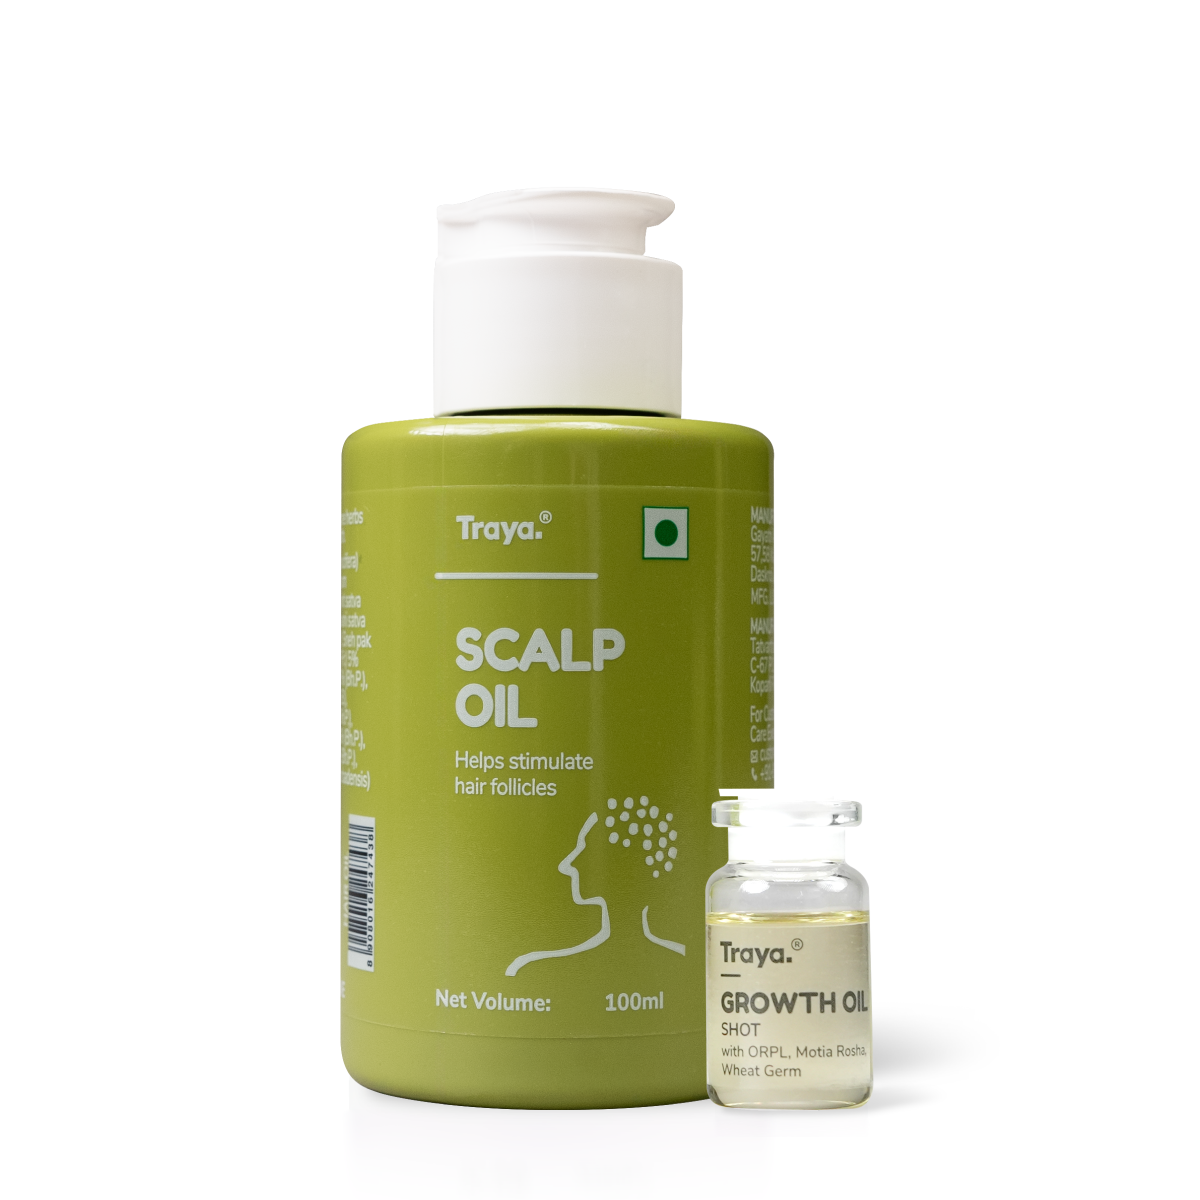 Scalp Oil 100ml with Growth Oil Shot  | Contains Ayurvedic Ingredients with ORPL, Wheat Germ, Motia Rosha